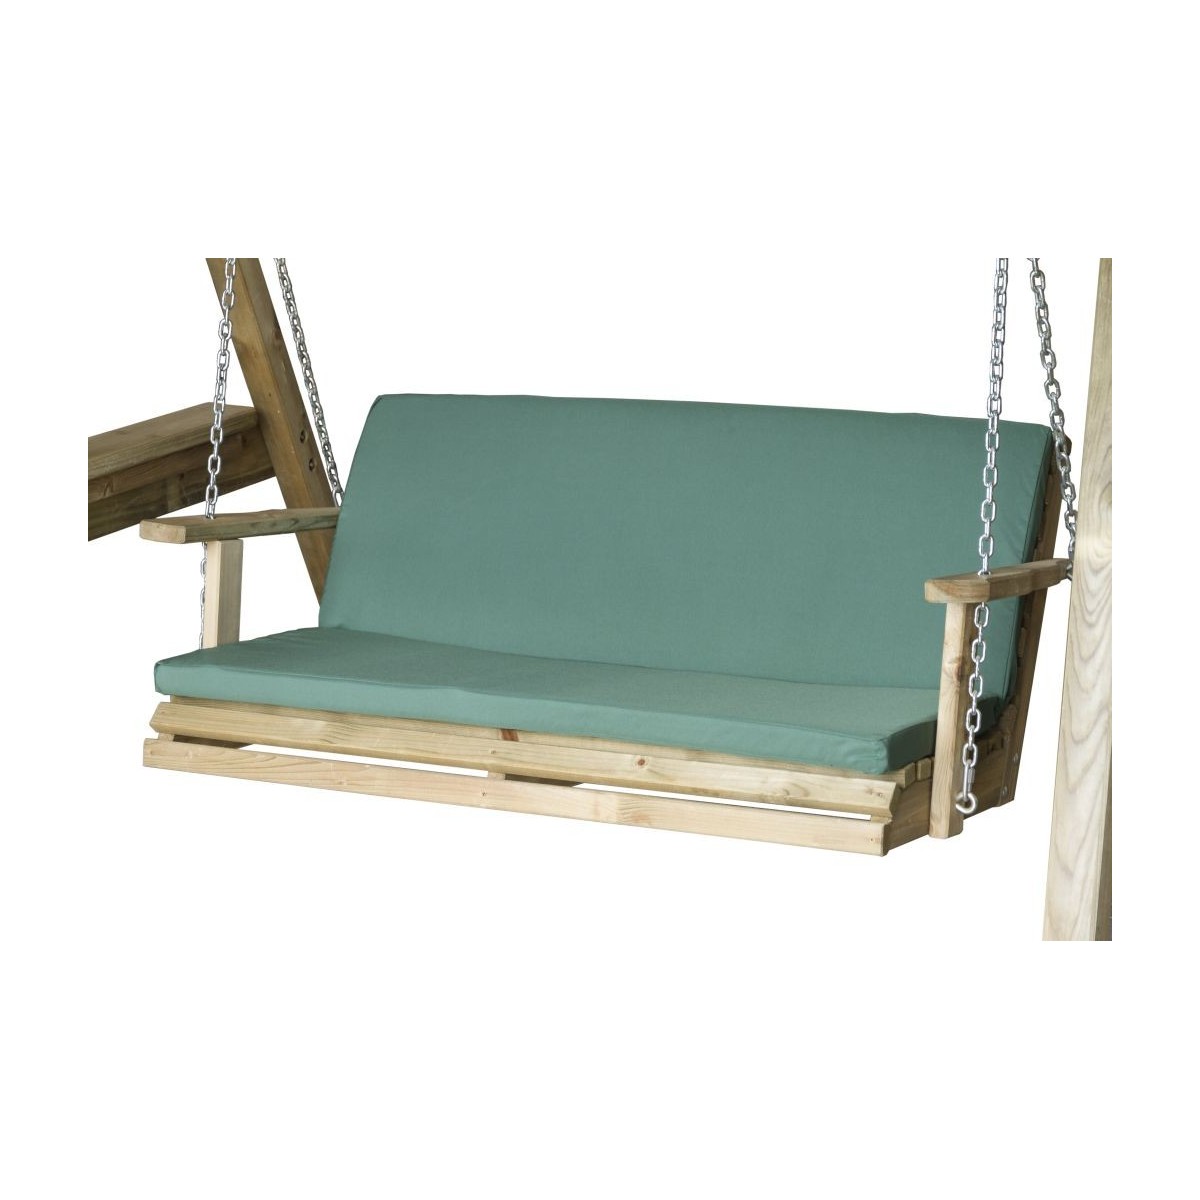 Green Seat pad for 2 seat swing